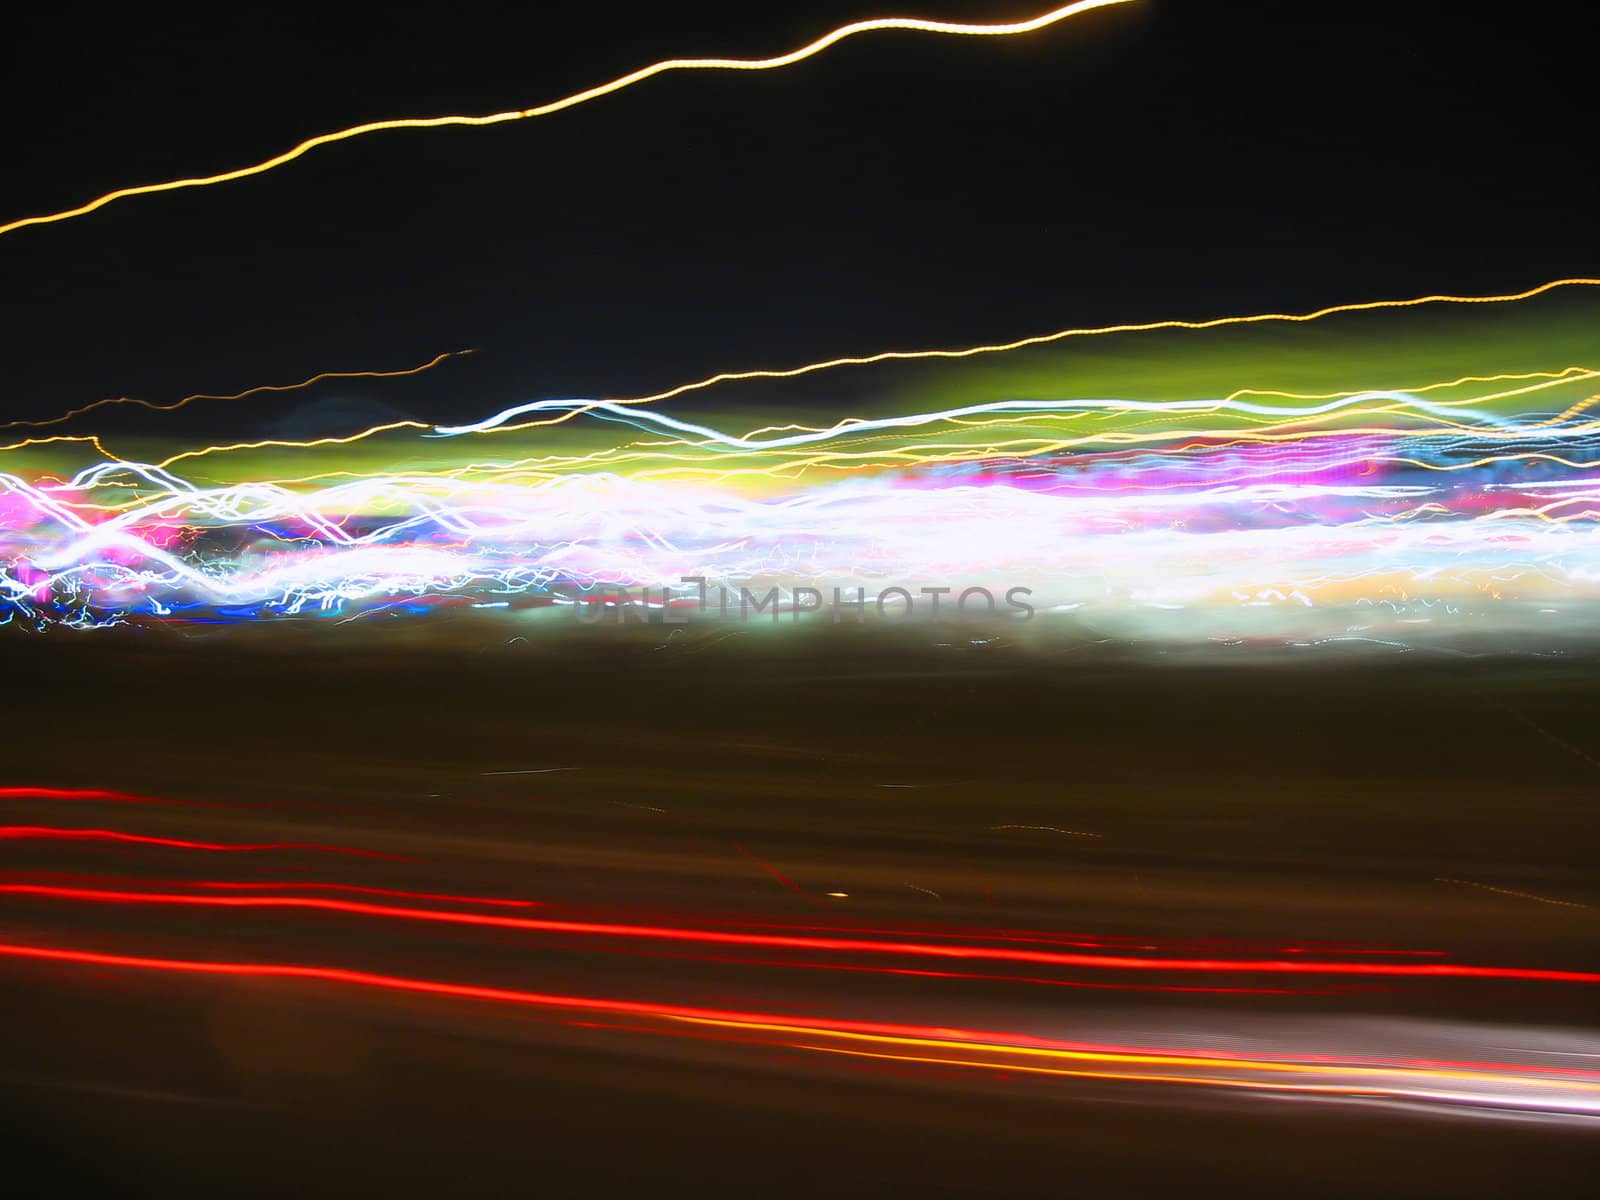 Abstract light trails captured from cars, signs, and other landmarks.